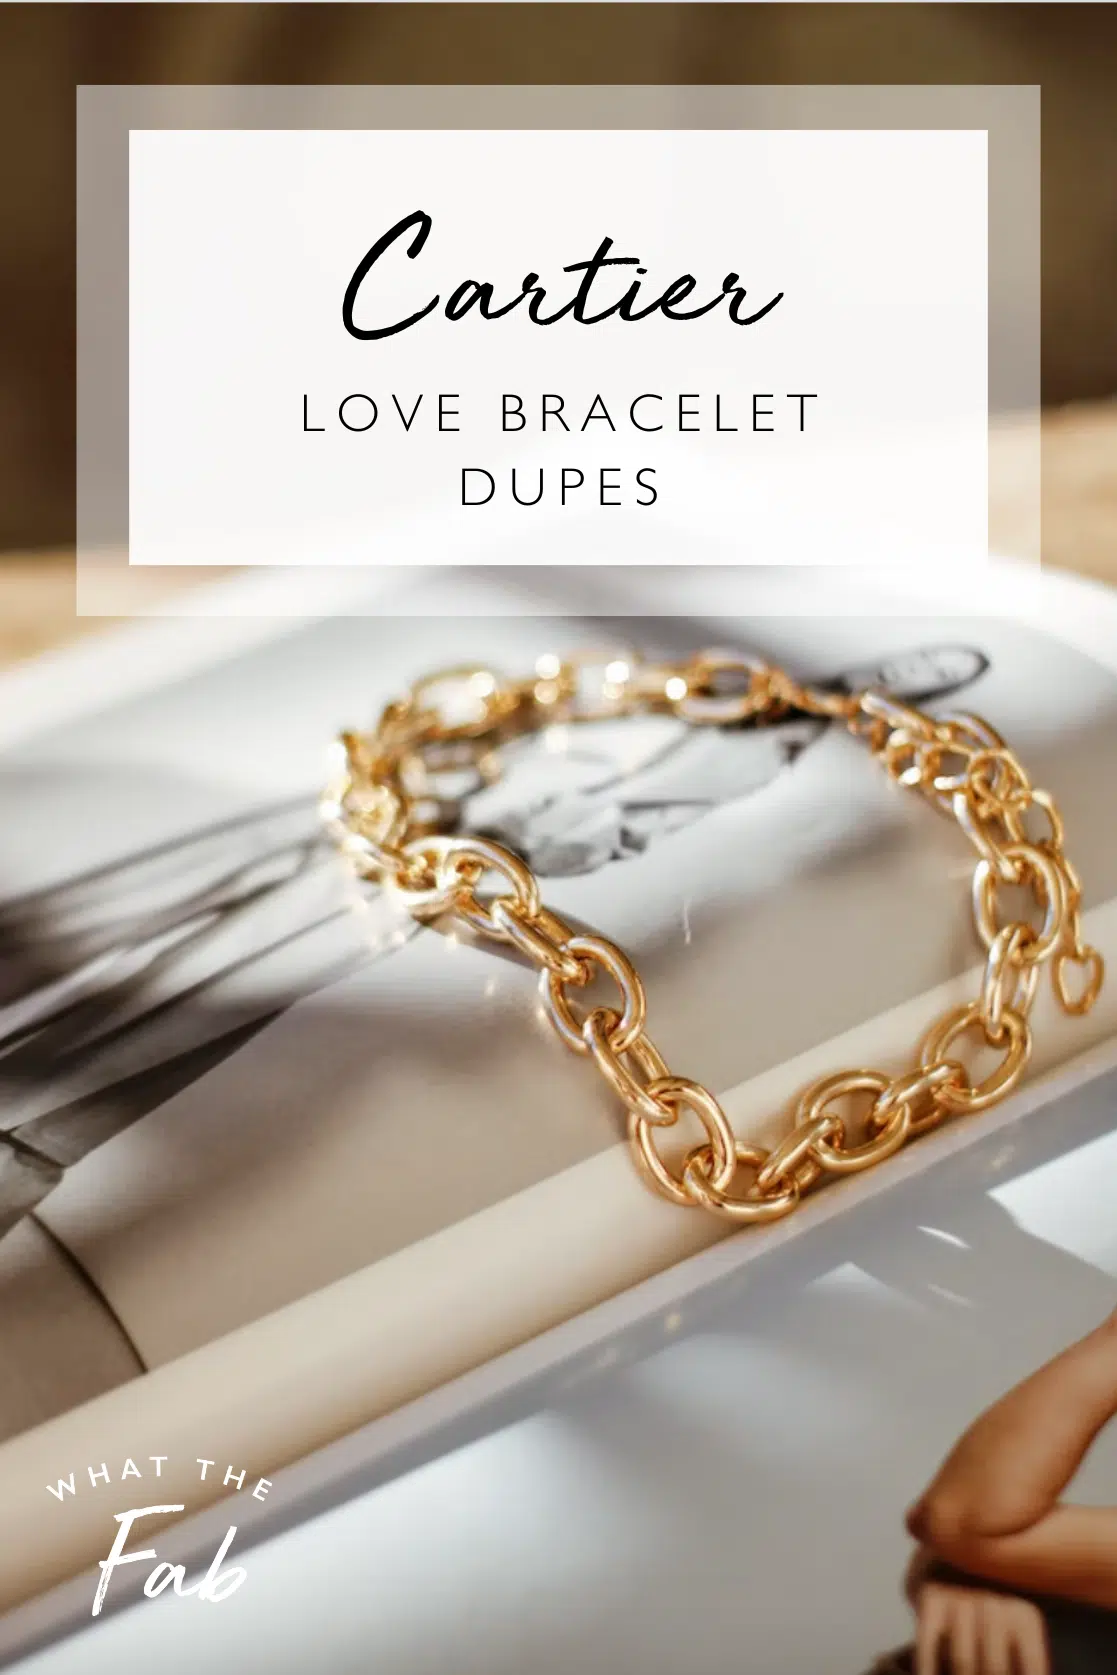 CARTIER Love Cuff vs Love Bracelet | Which one should you choose? - YouTube